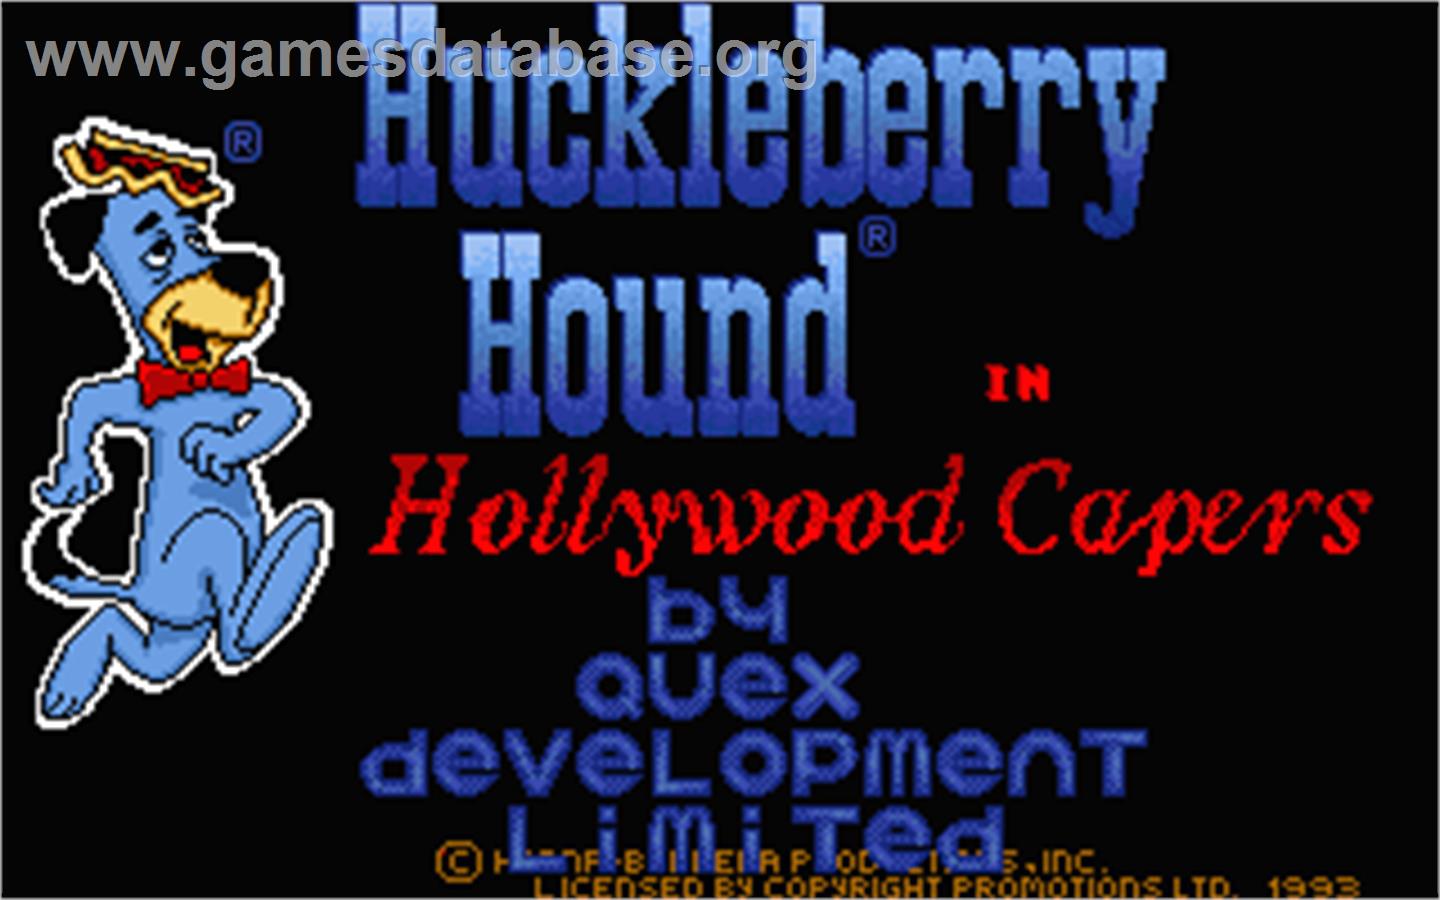 Huckleberry Hound in Hollywood Capers - Atari ST - Artwork - Title Screen